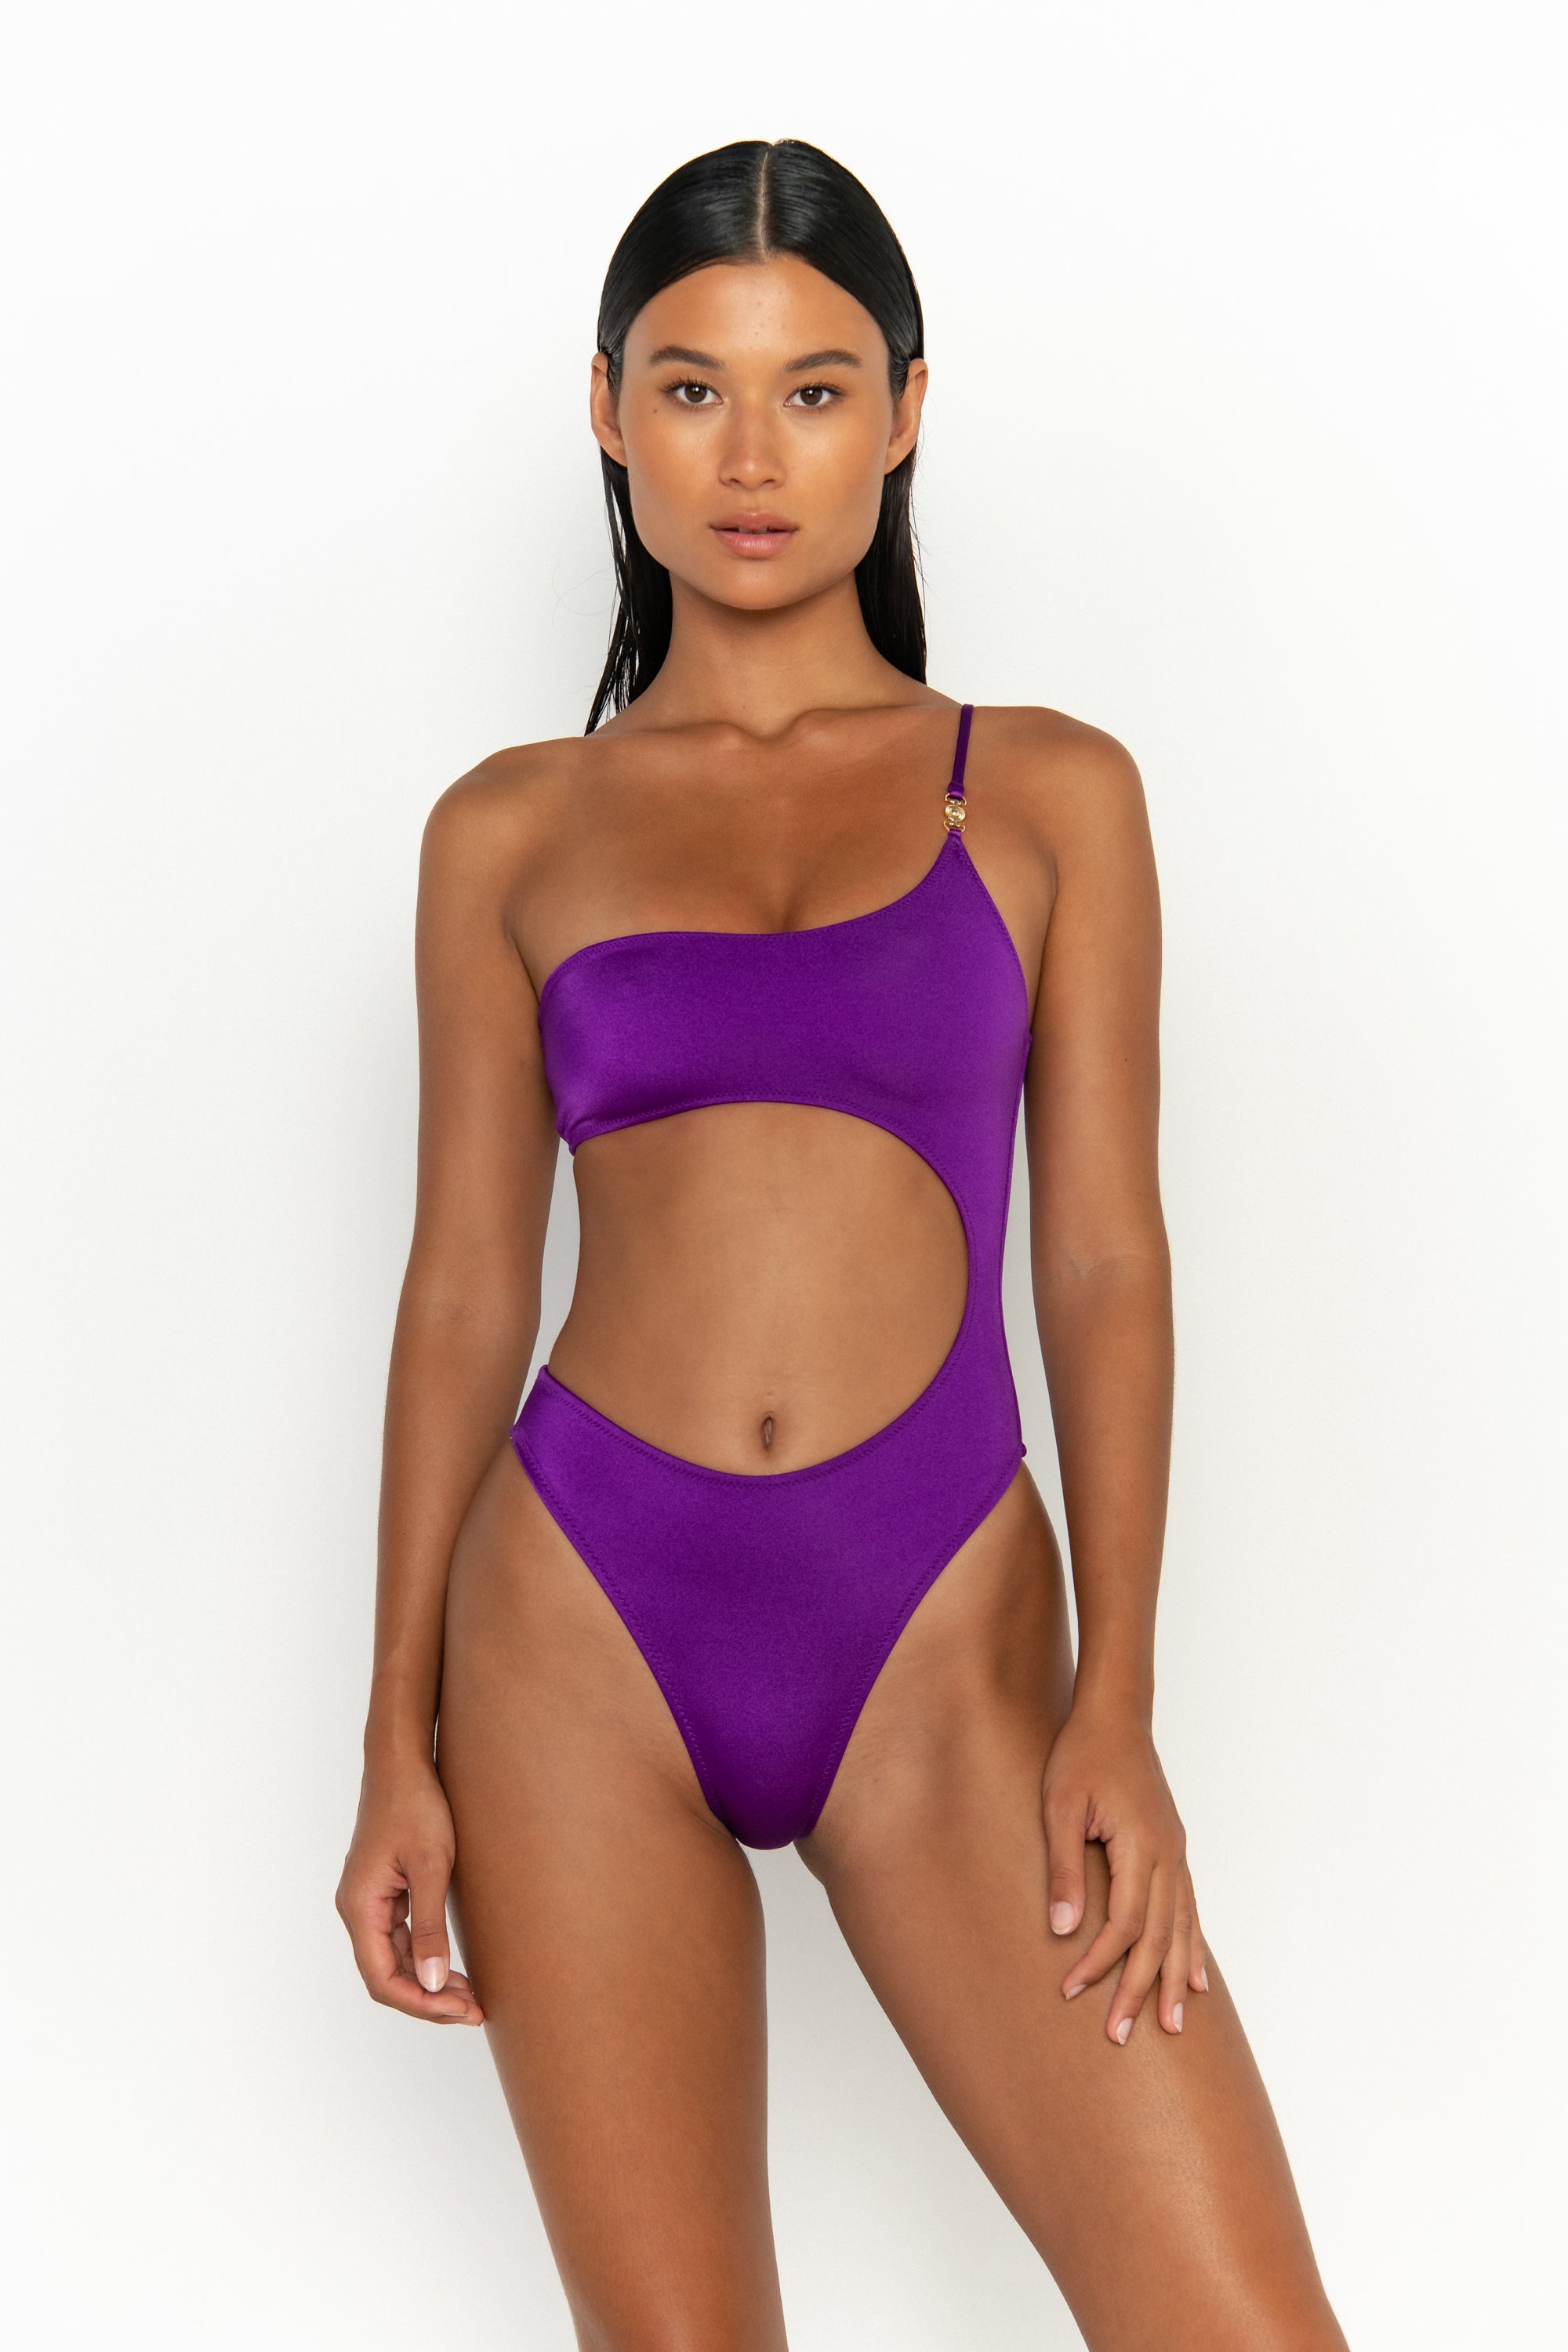 swimsuit as an outfit, outfit as a swimsuit #swimromper #onepiece